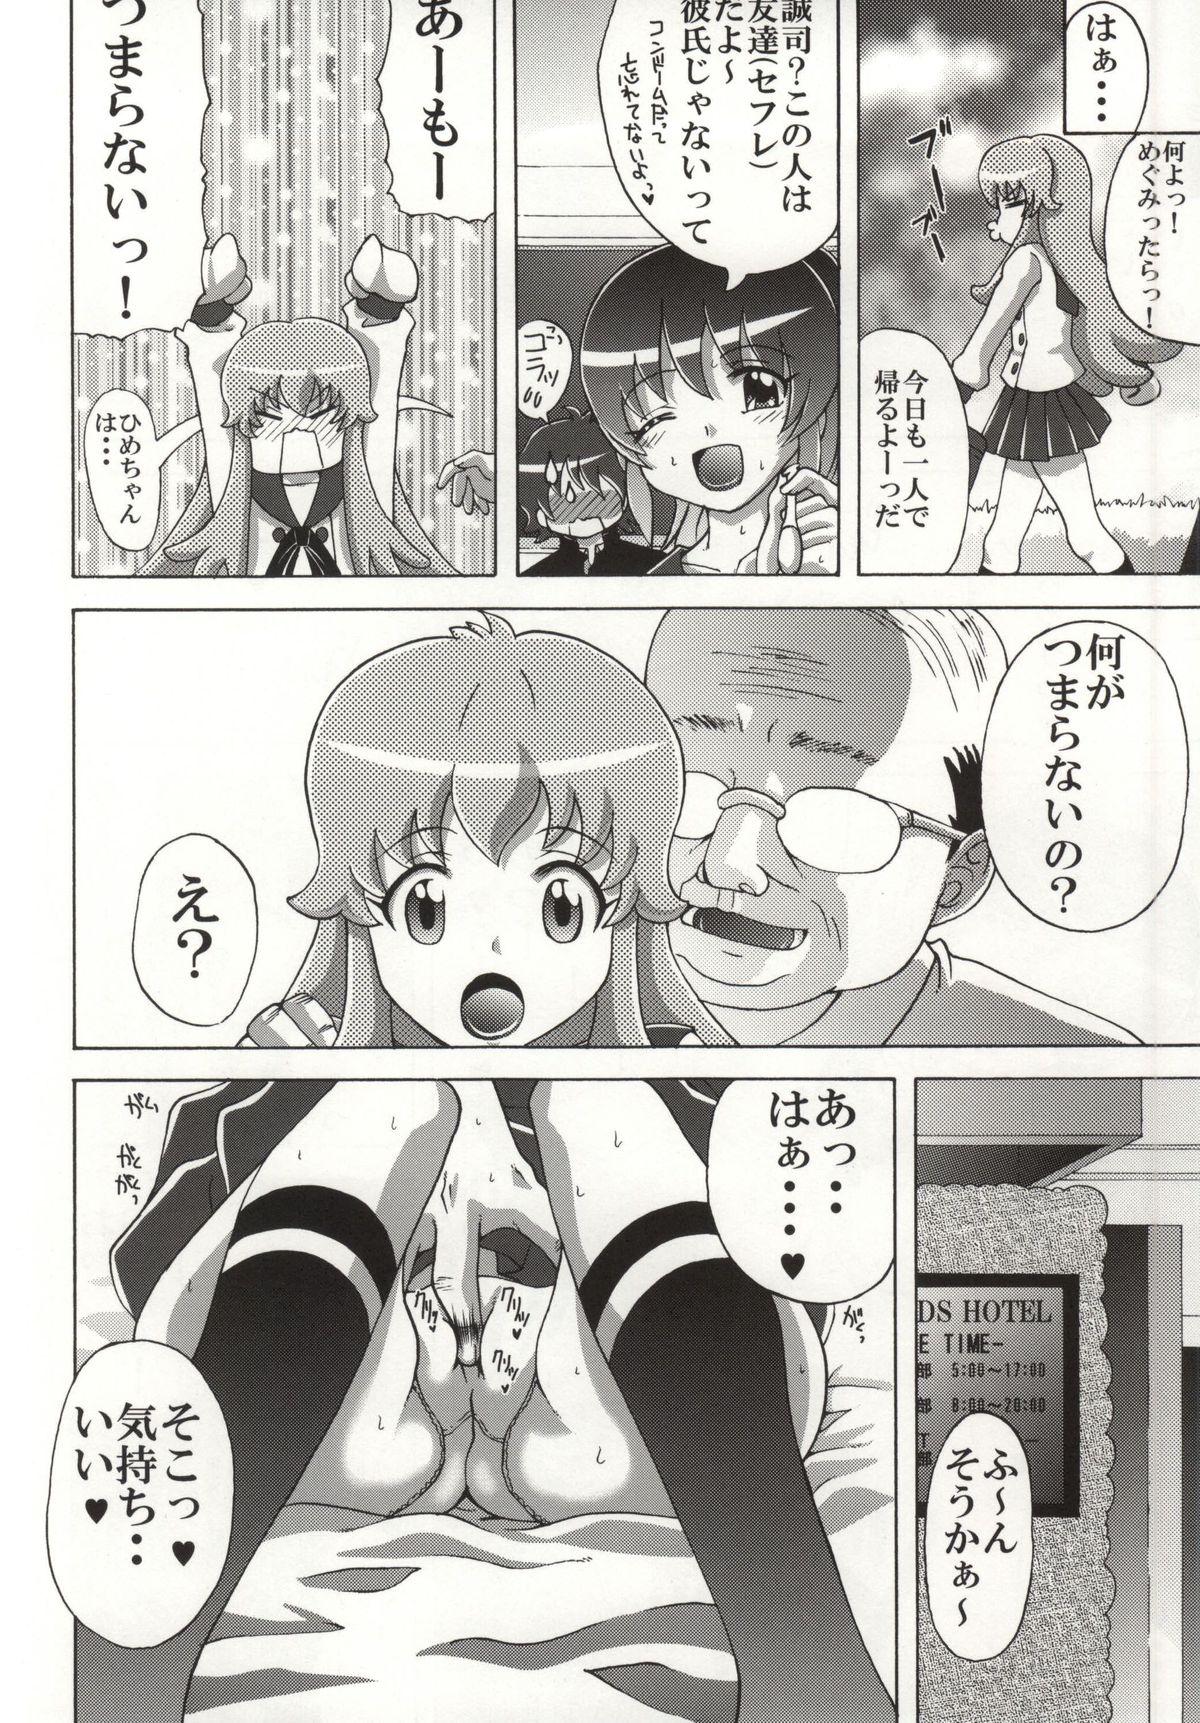 Phat Hime-chan no Tomodachi - Happinesscharge precure Ex Girlfriend - Page 3